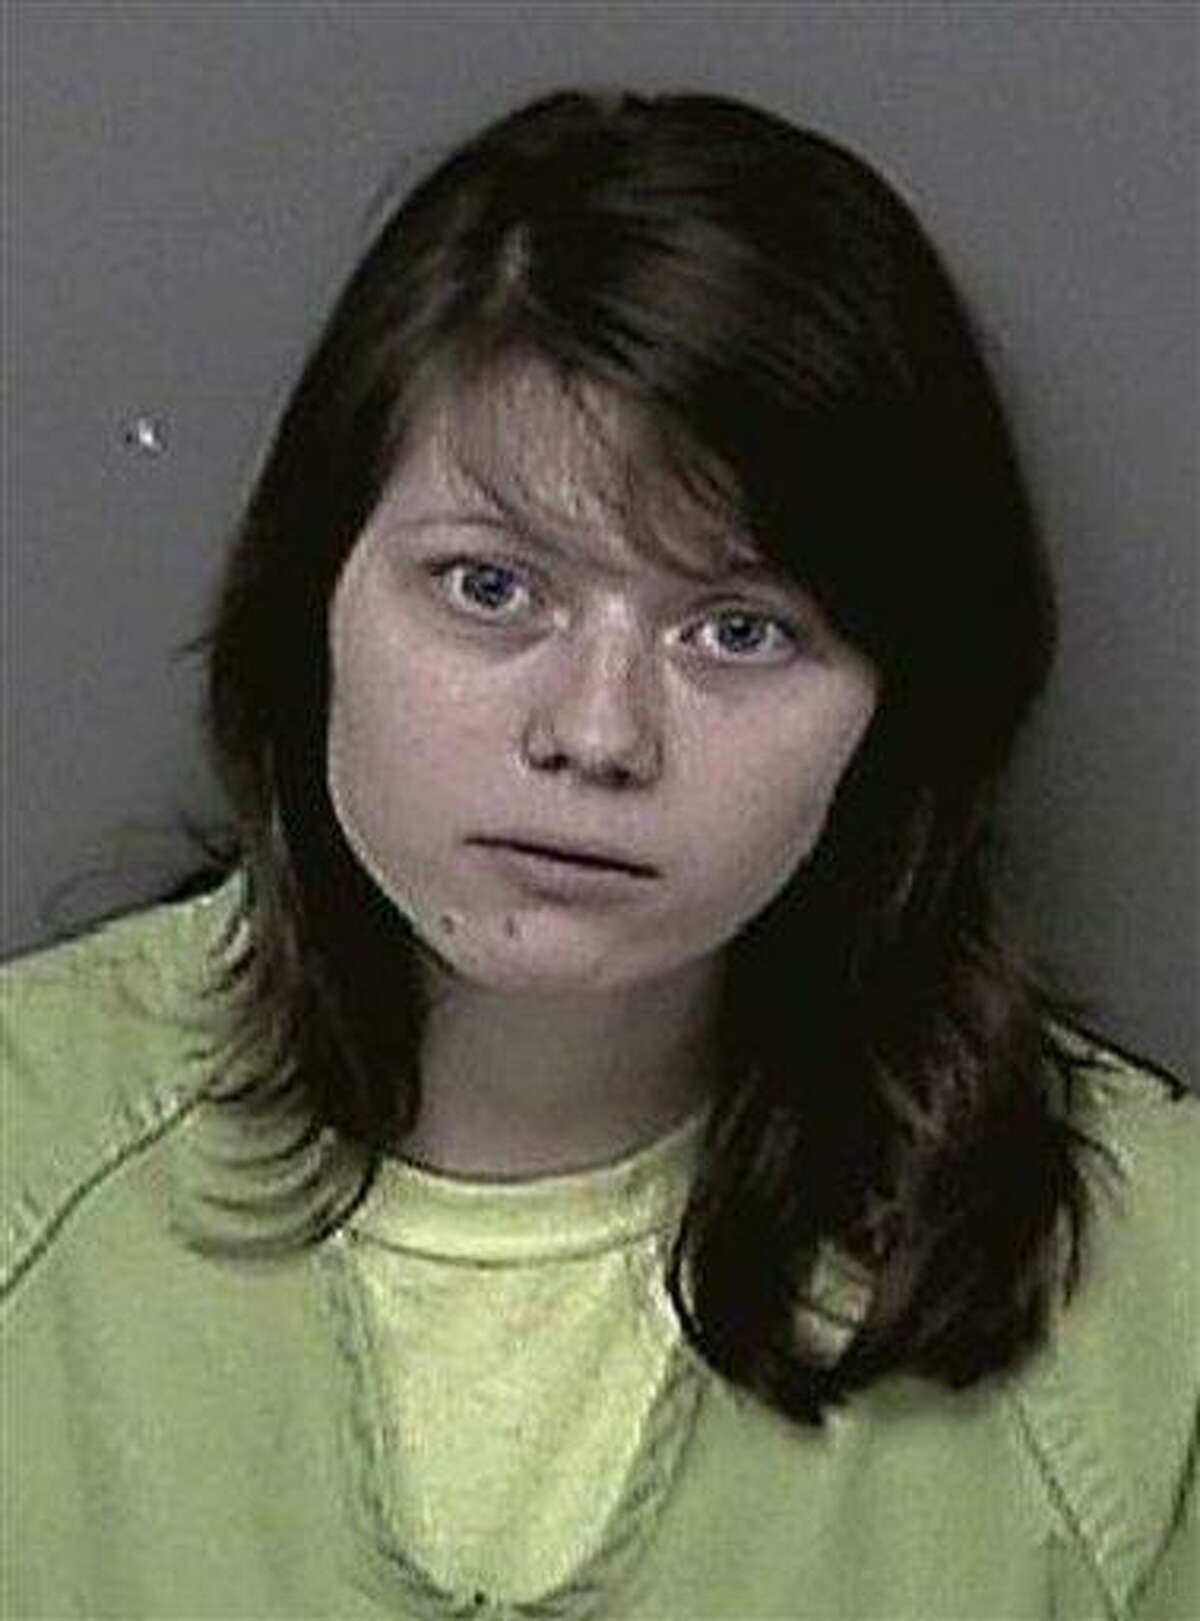 This photo released Feb. 7 by the Cole County sheriff's office shows Alyssa Bustamante. Associated Press